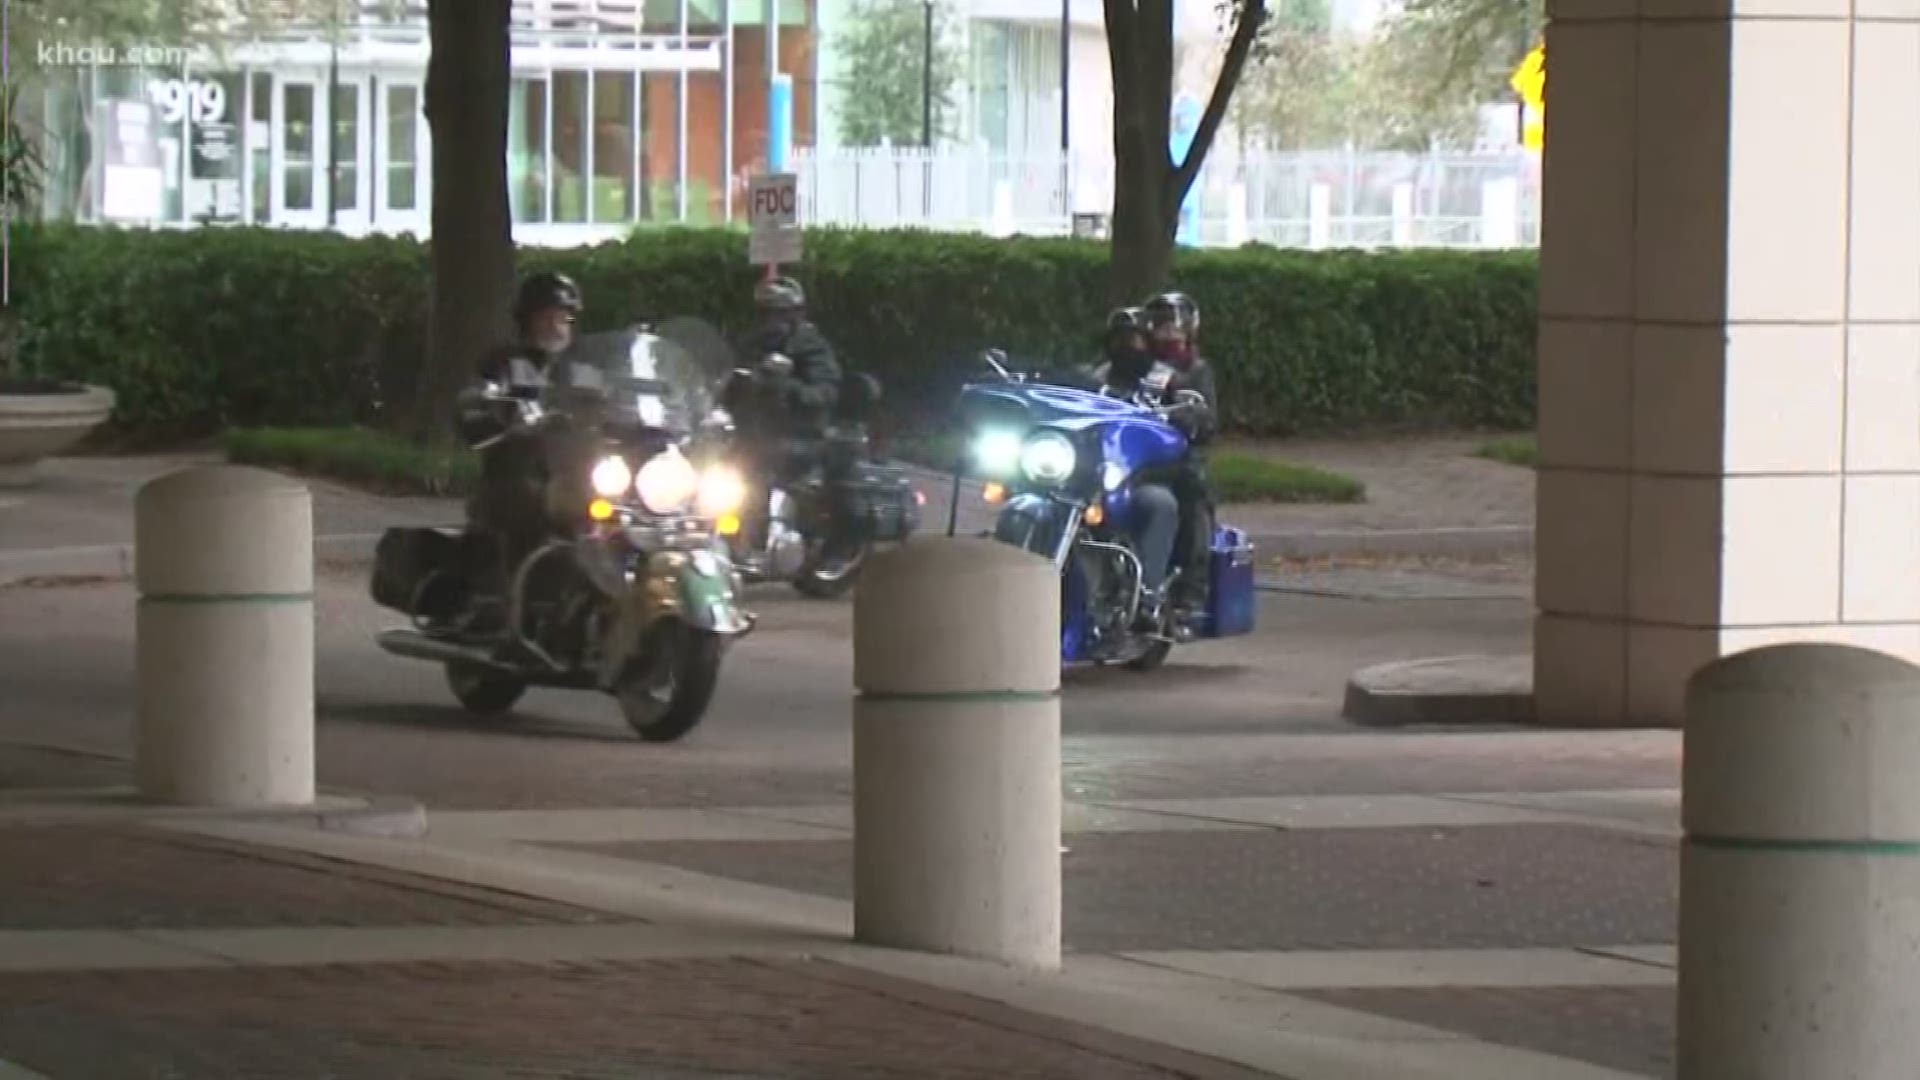 A band of local biker clubs delivered toys to the Shriner's Children's Hospital on Saturday.